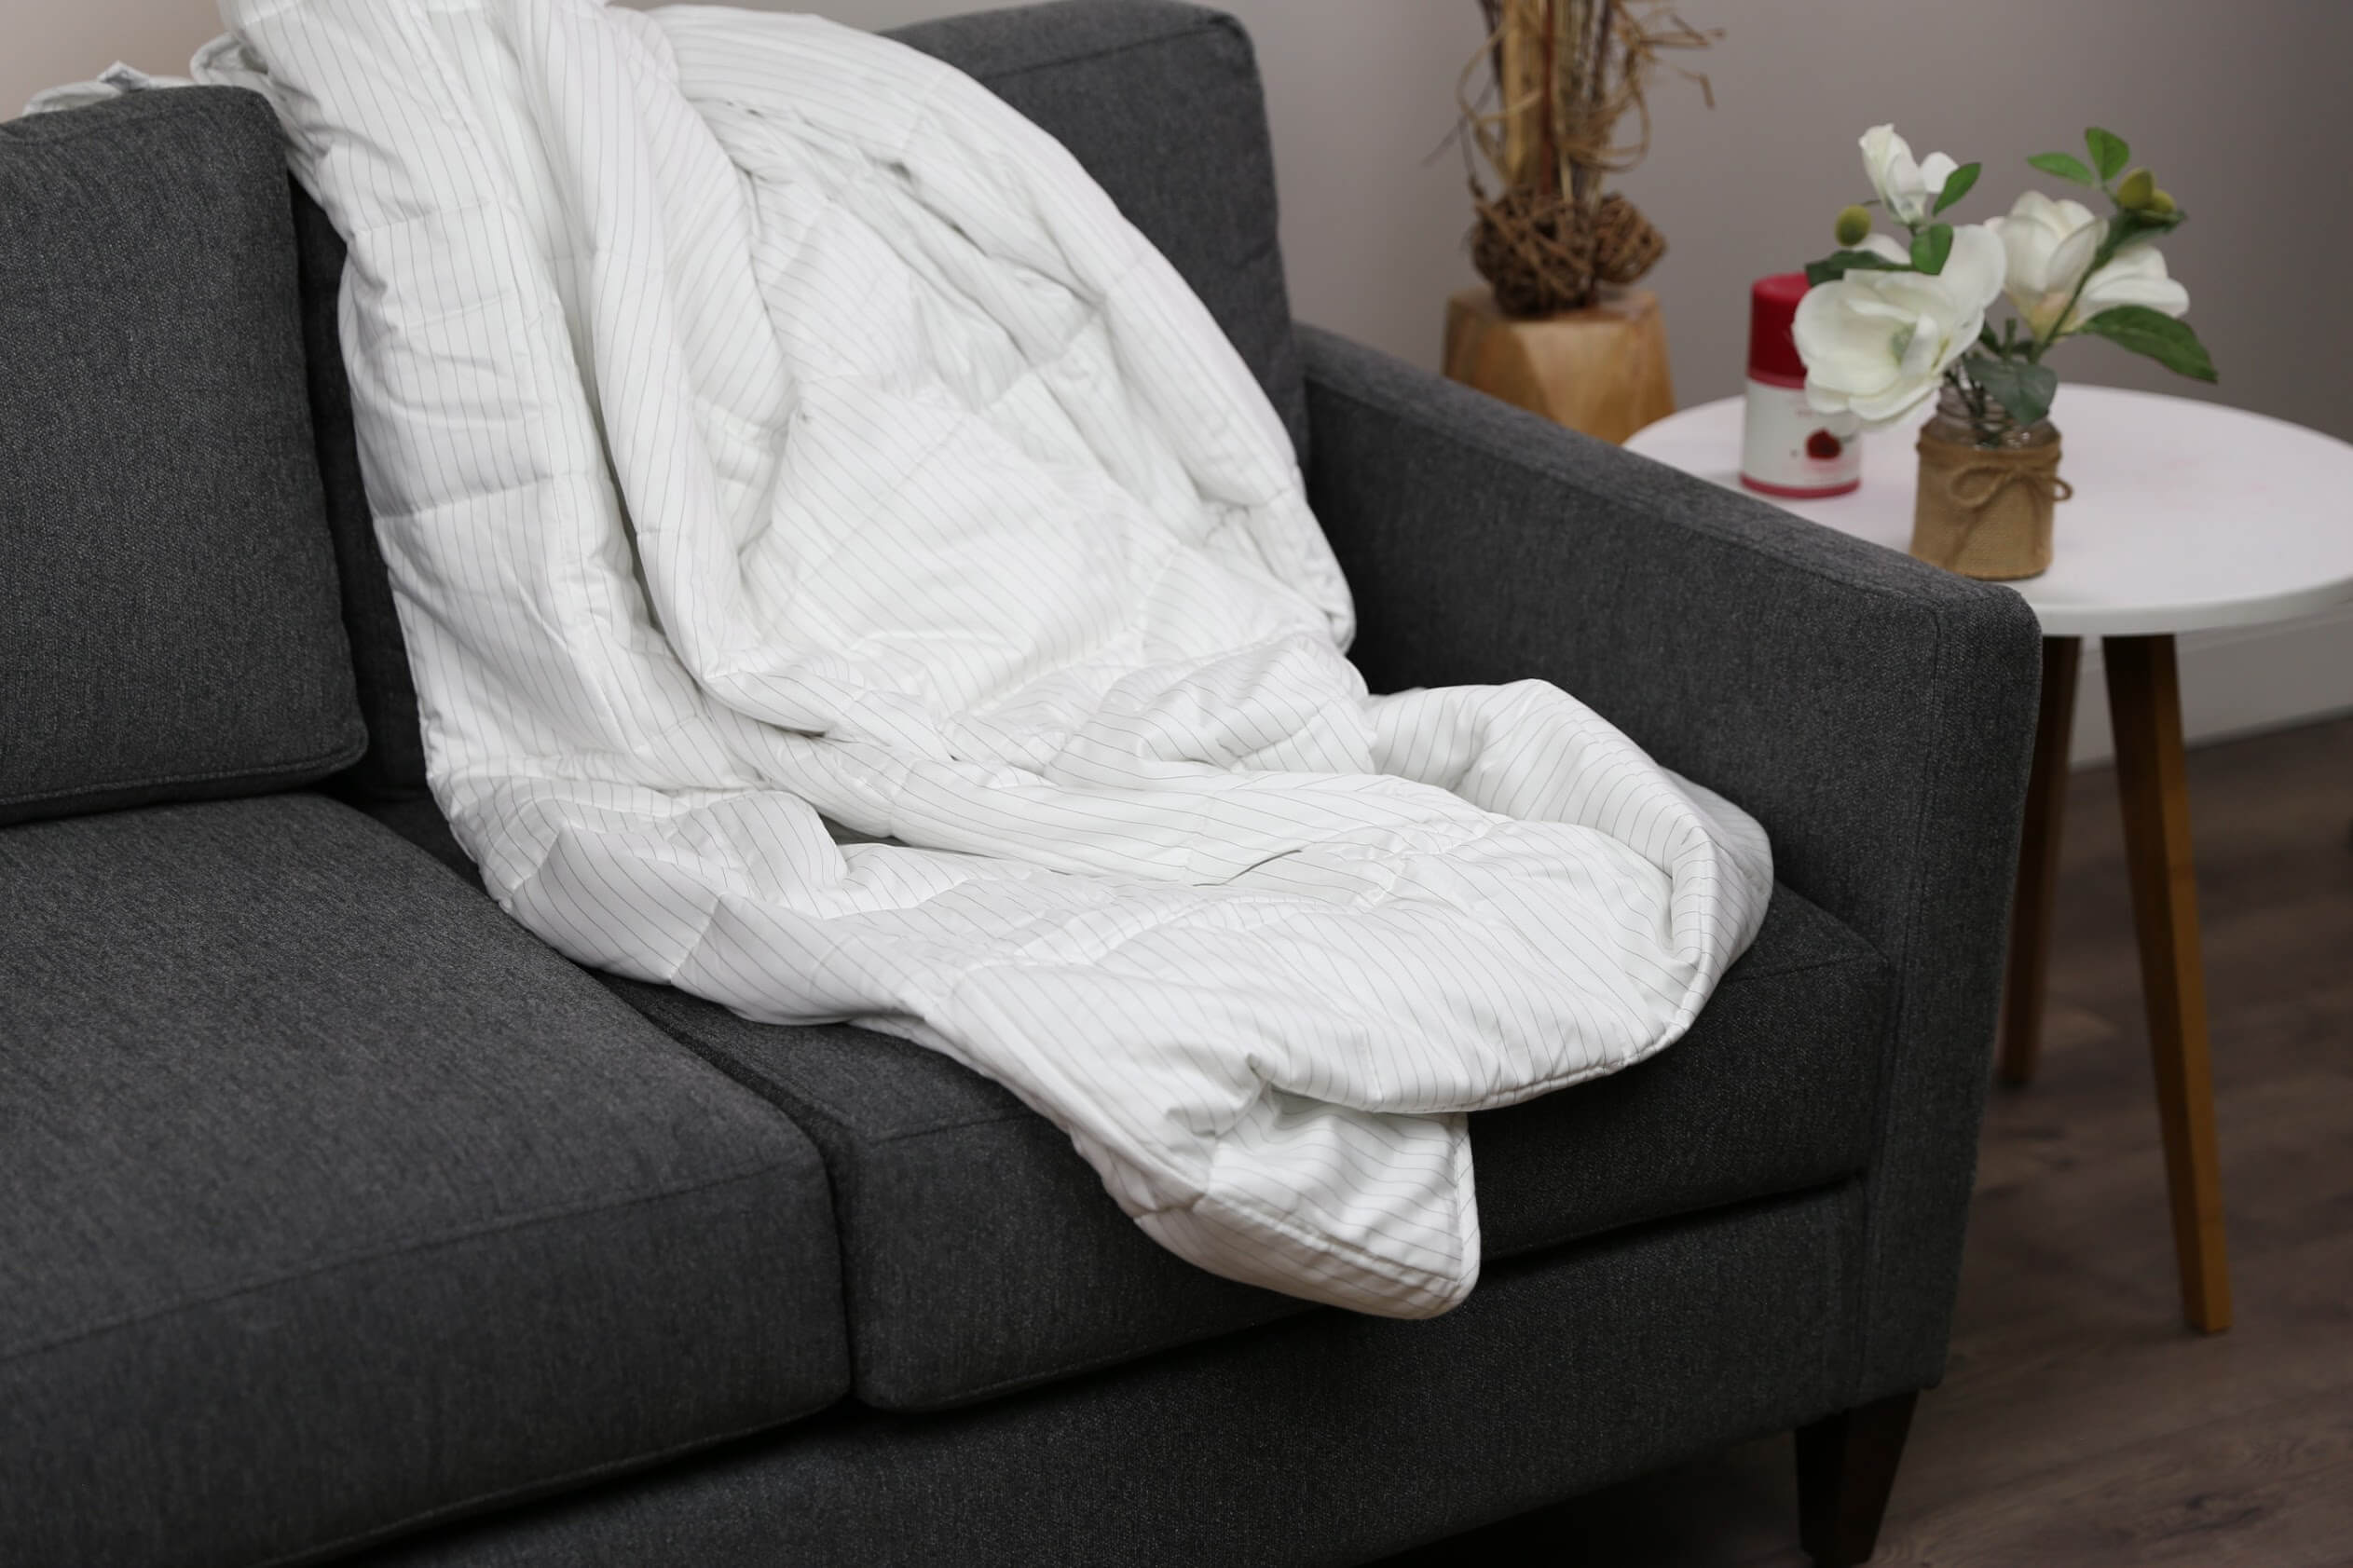 draped luna weighted blanket